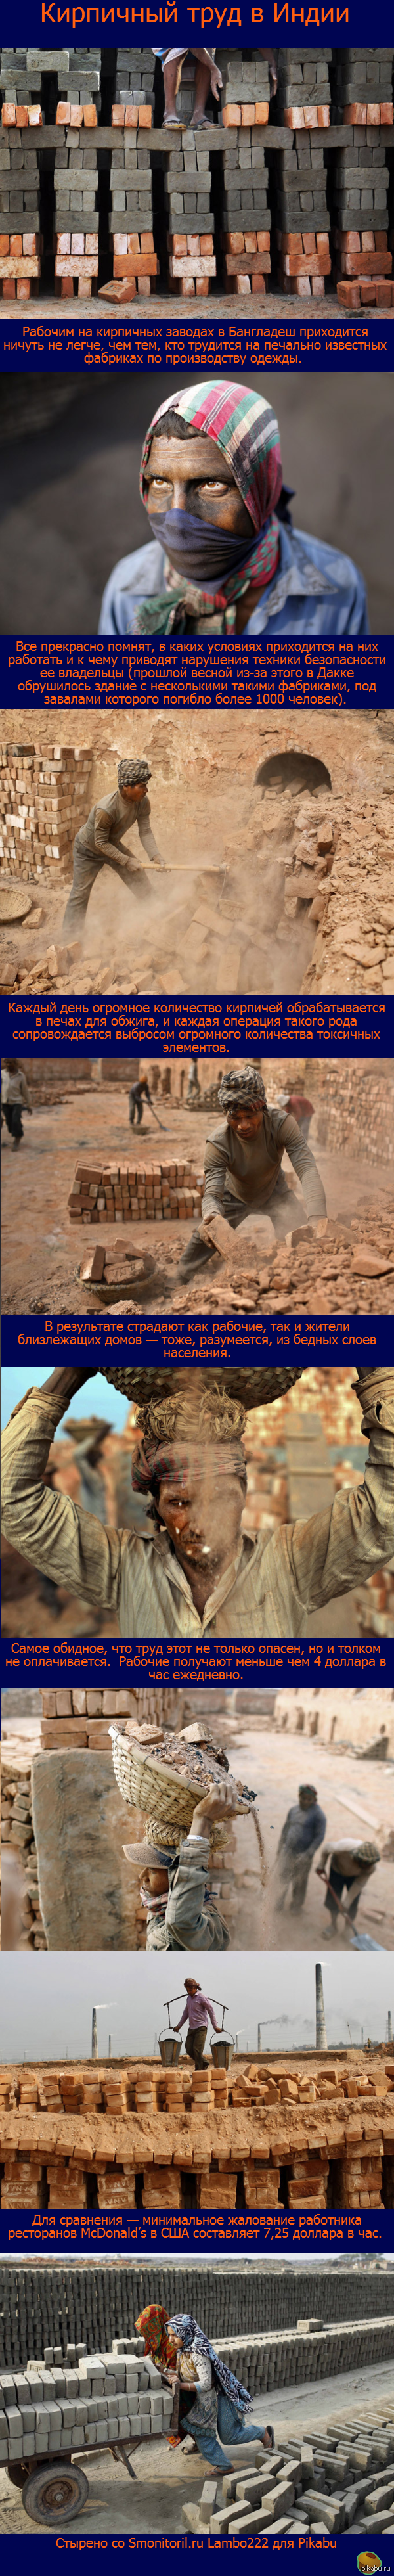 Brick labor in India - From the network, Longpost, Not mine, India, Bricks, Hell, Work, Work